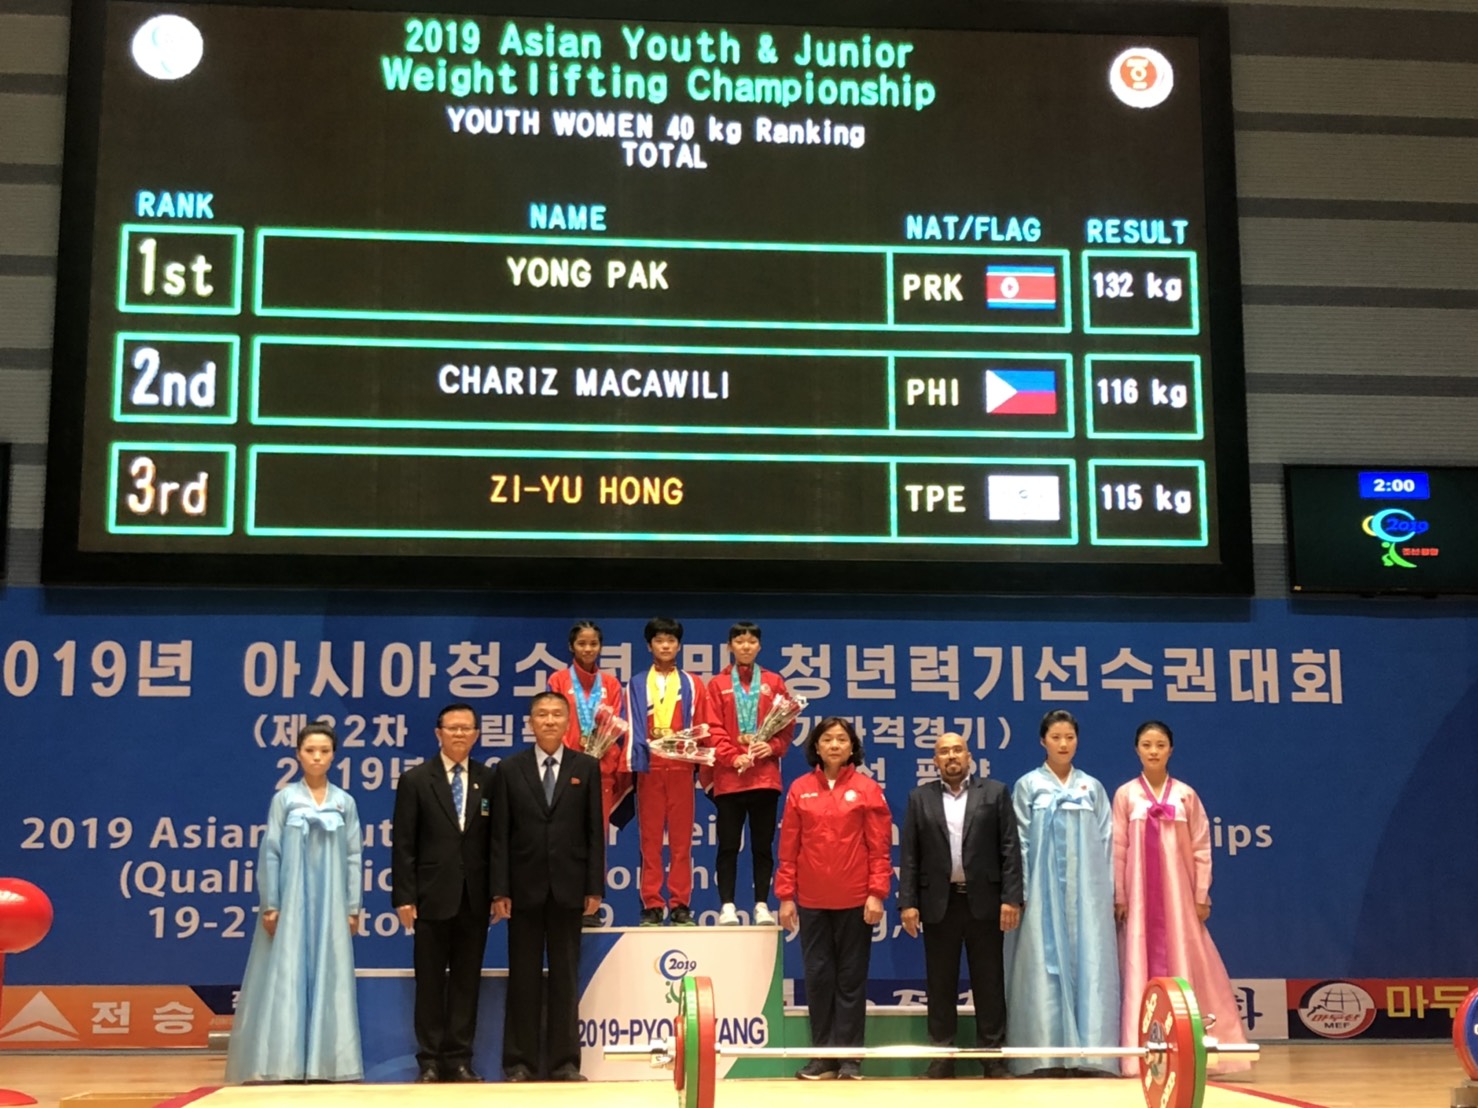 Asian Weightlifting Federation News 2019 Asian Youth & Junior